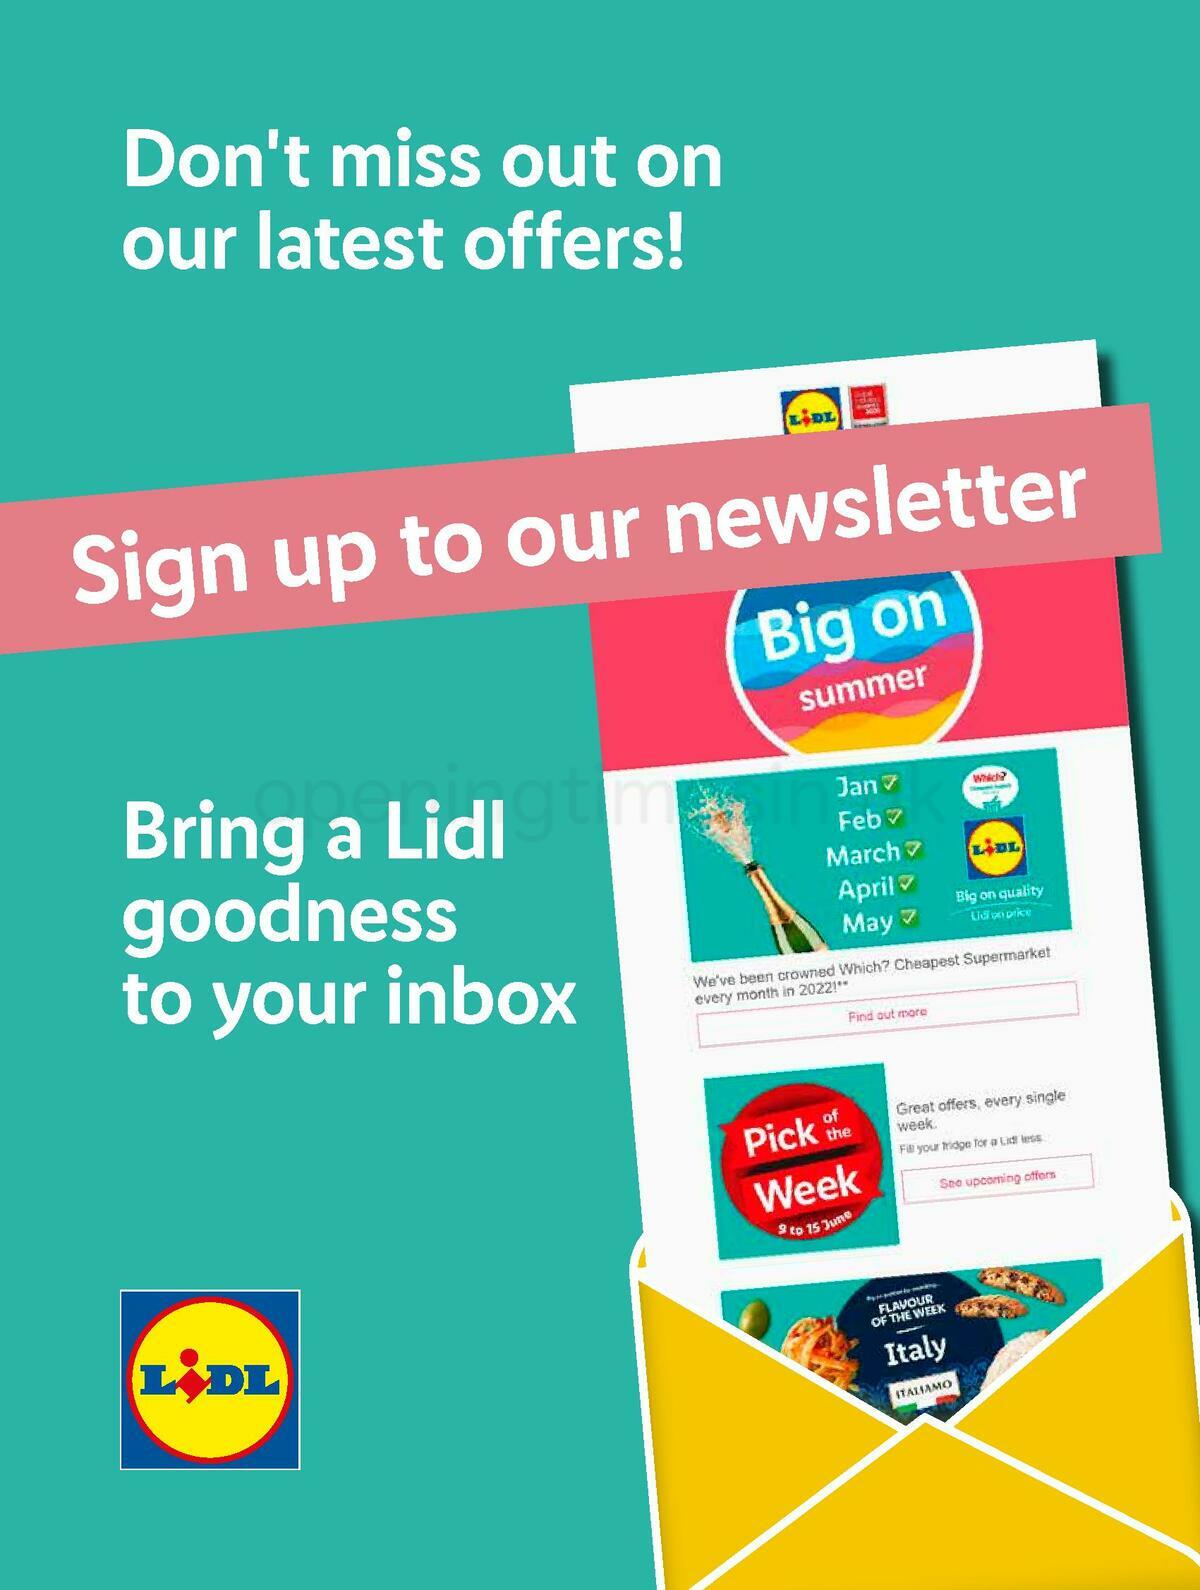 LIDL Offers from 8 September